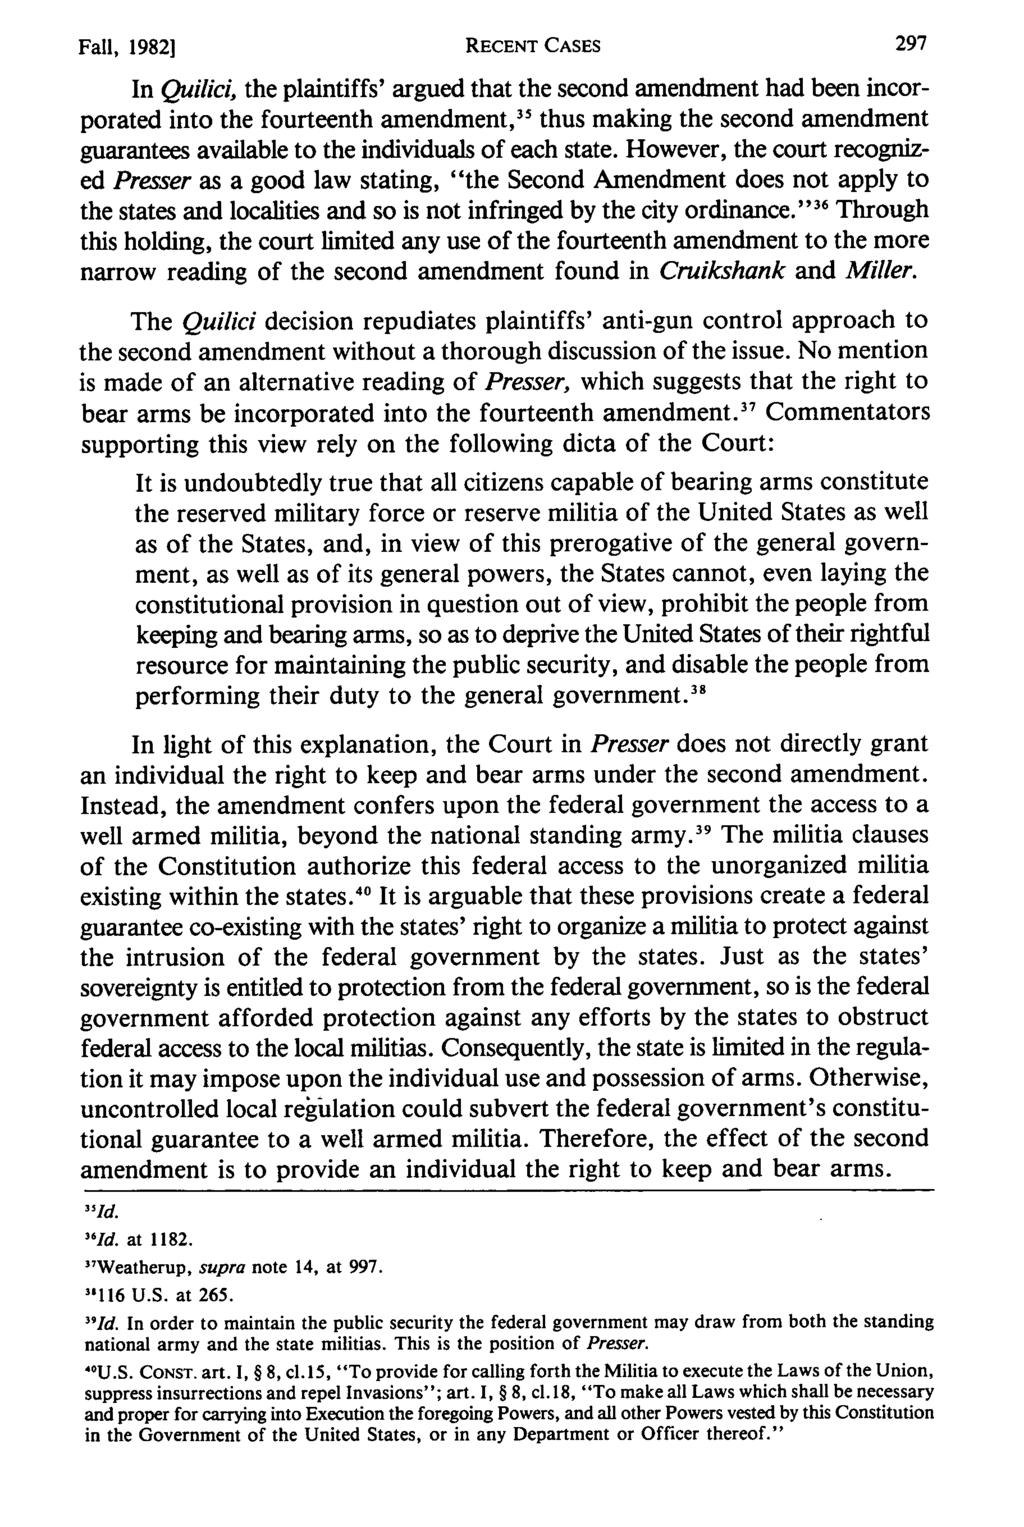 Fall, 19821 RECENT CASES Benedic: Quilici v.